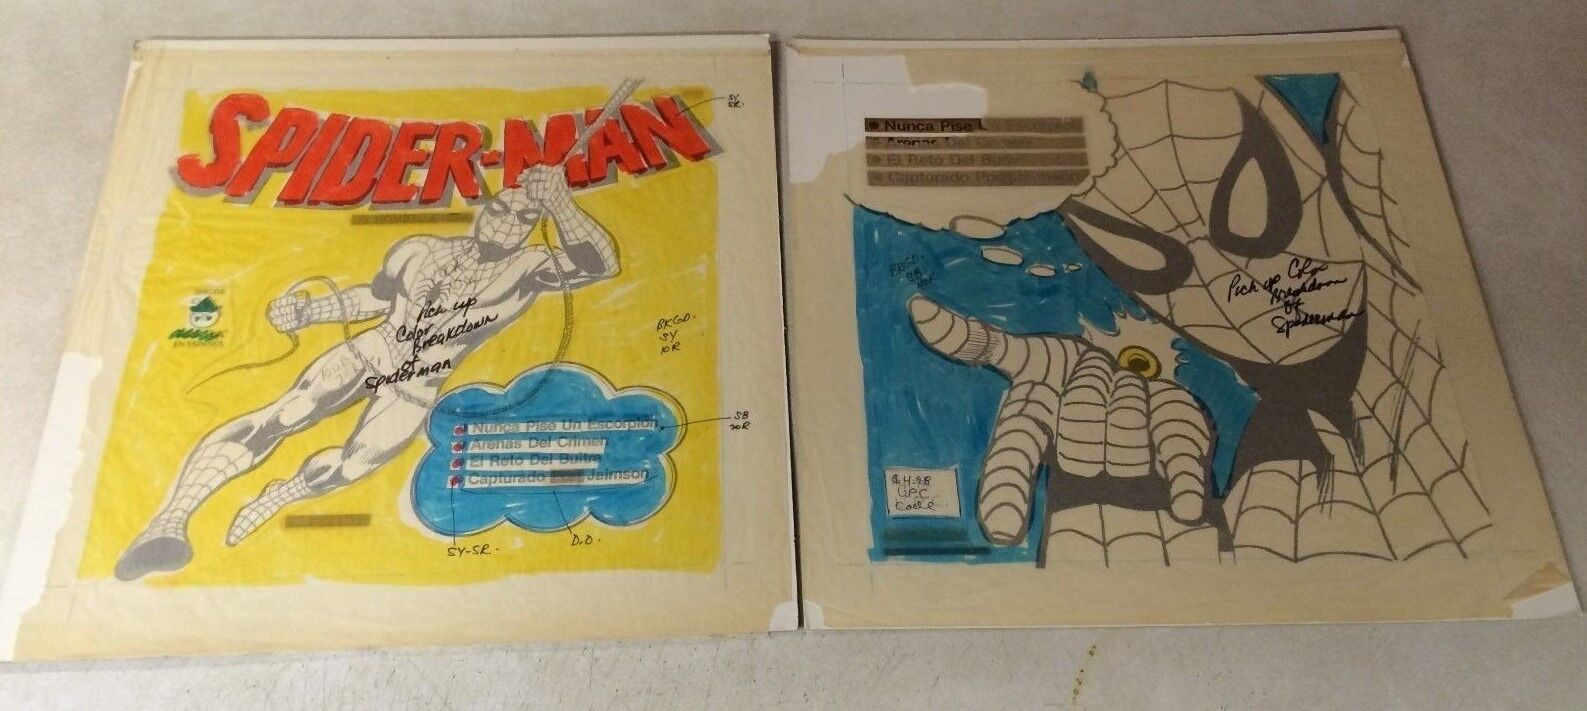 Spider-man record COVER prod ART and COLOR GUIDES Peter Pan 1981 Spanish #804